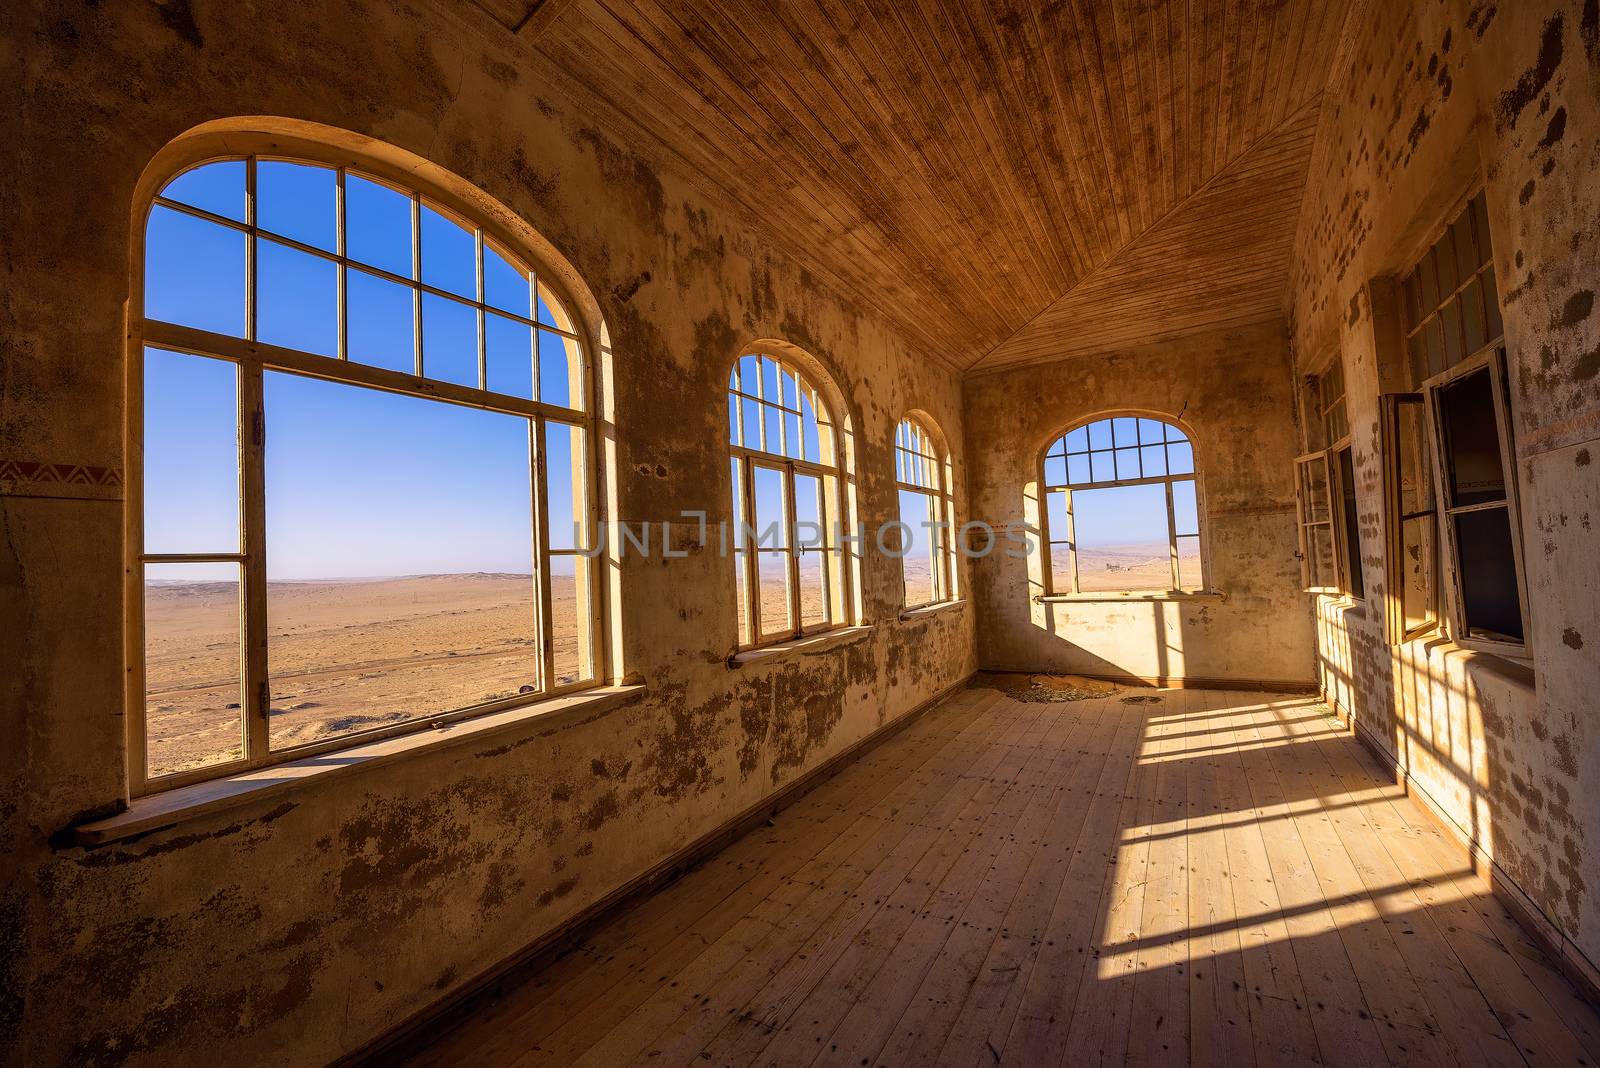 Ruins of the mining town named Kolmanskop located in the Namib desert near Luderitz in Namibia, Southern Africa